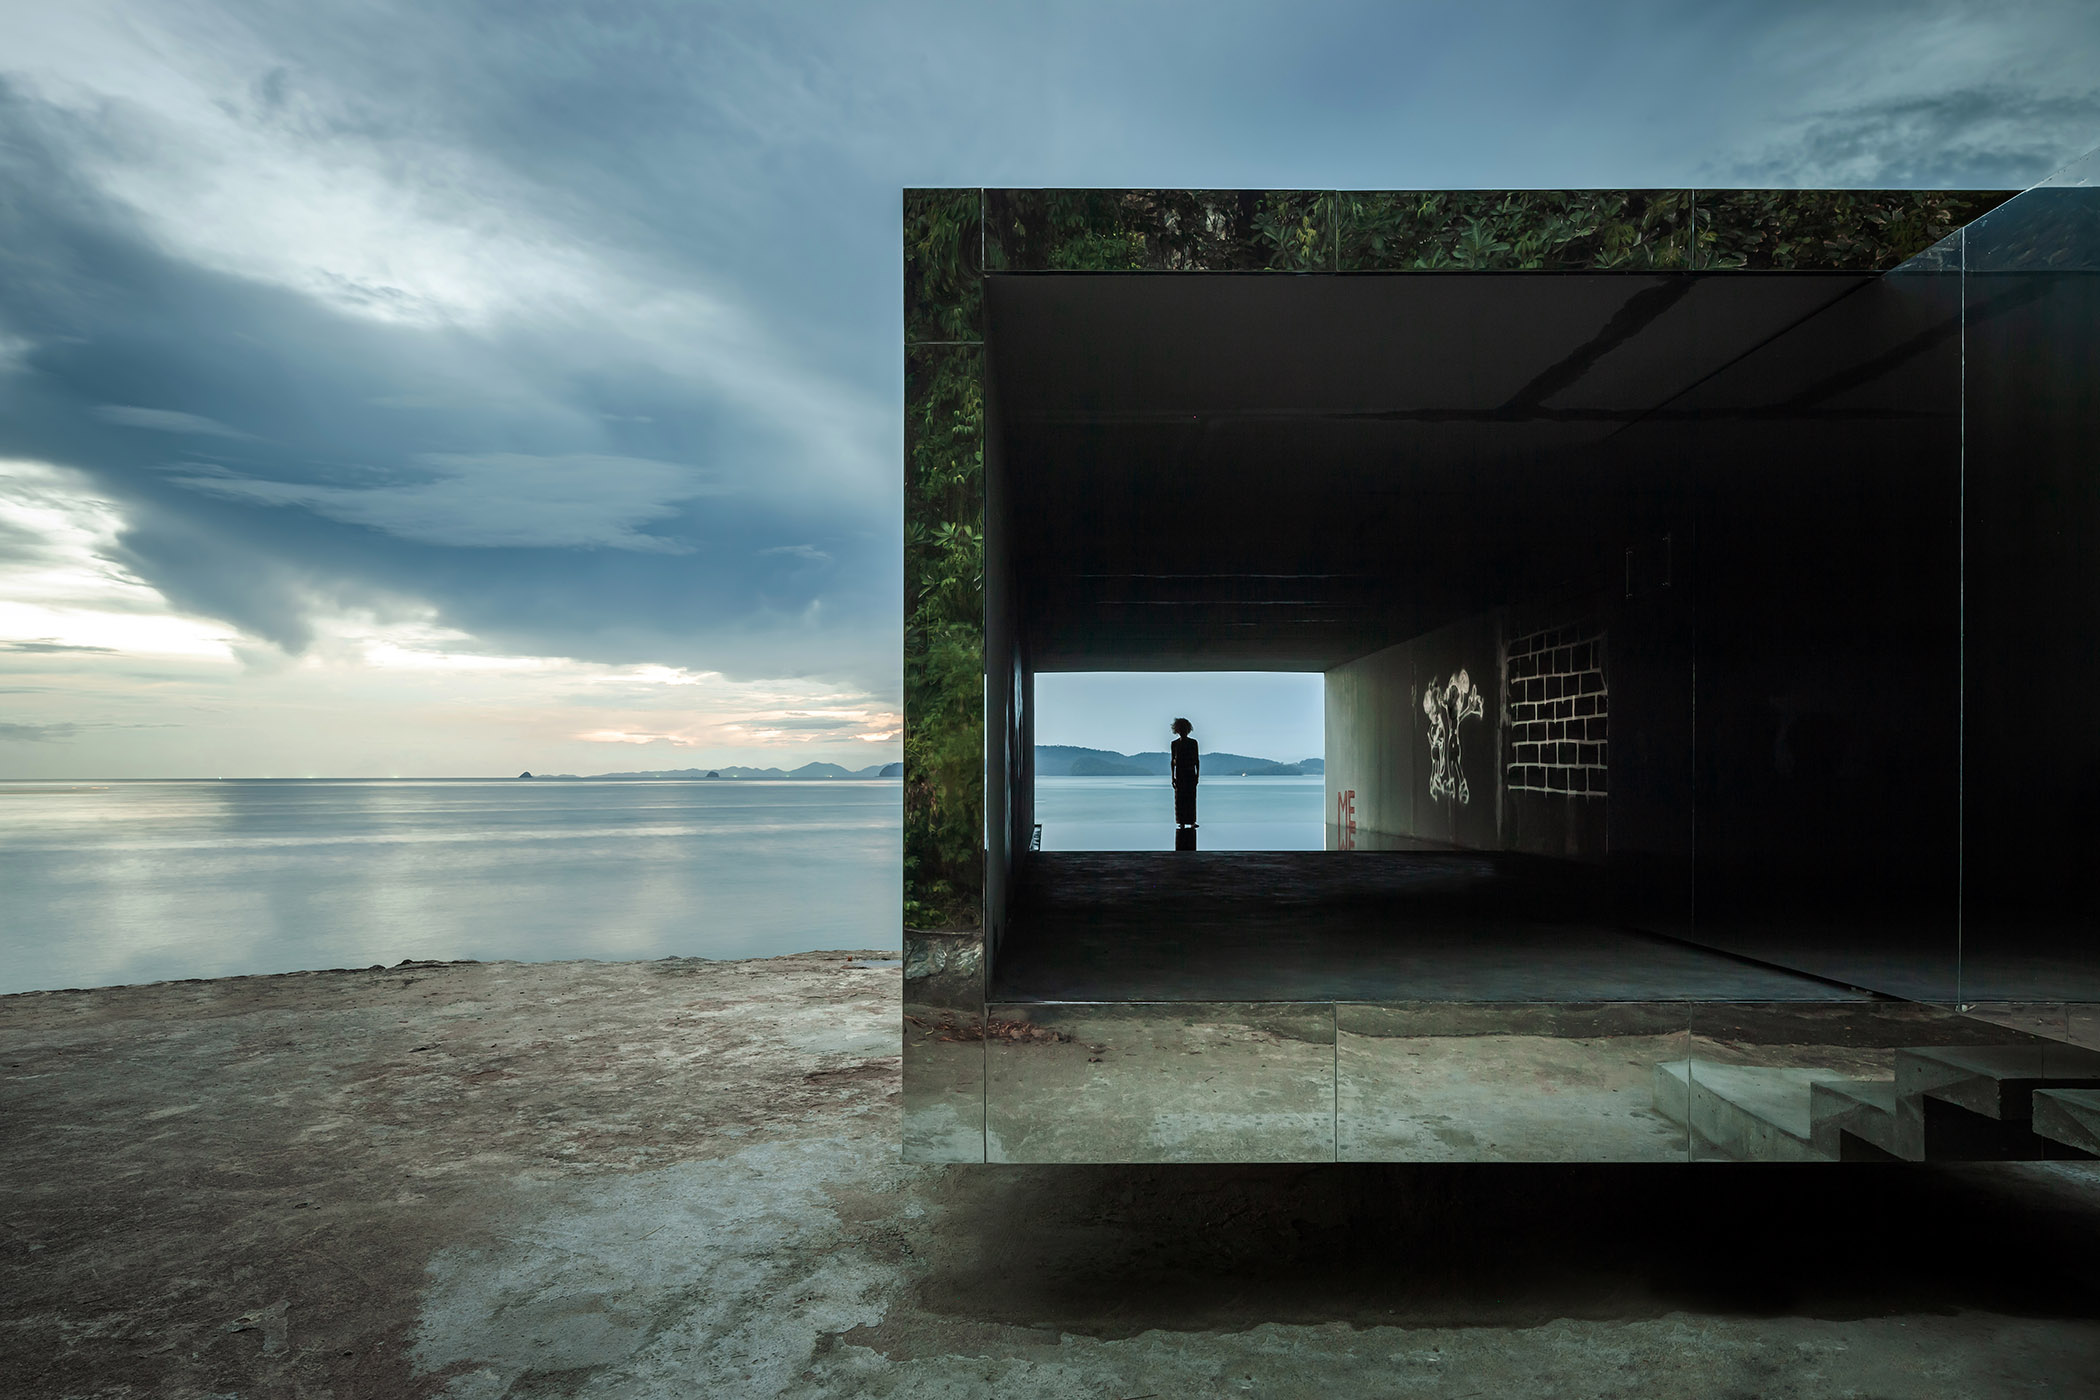 No sunrise, no sunset pavilion. The steel reflects the surrounding nature between reality and illusion